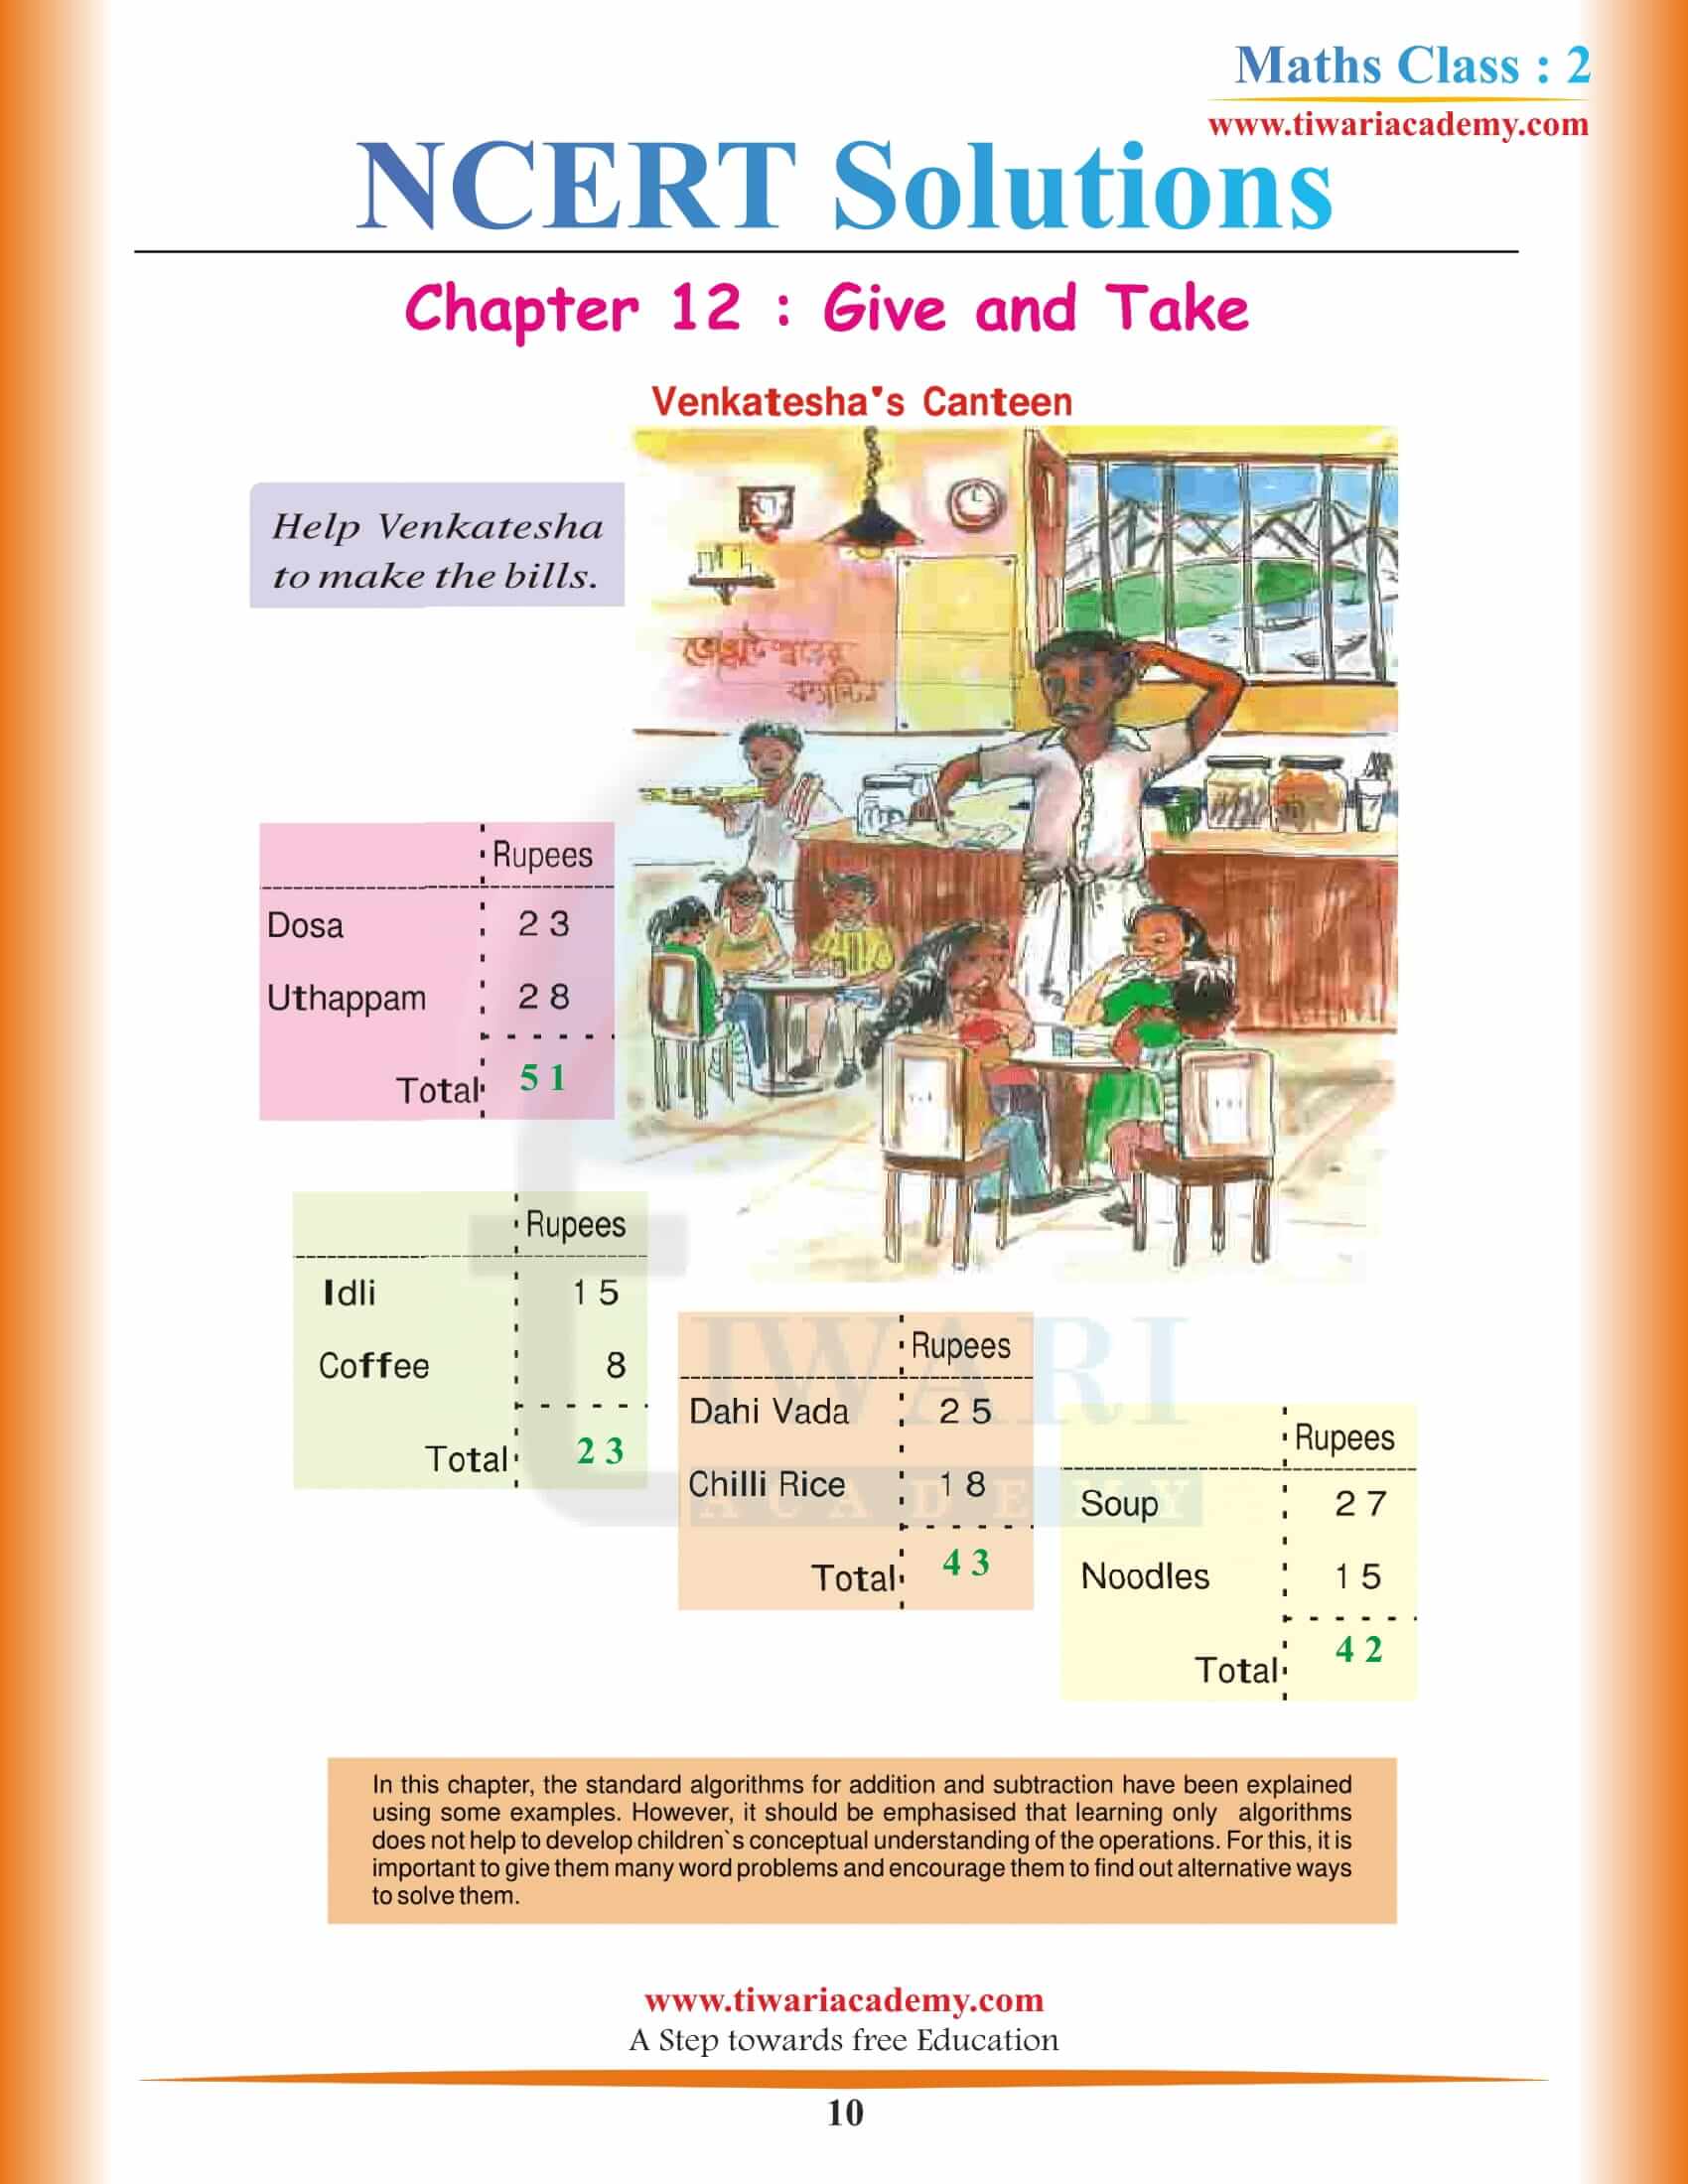 NCERT Solutions for Class 2 Maths Chapter 12 in English